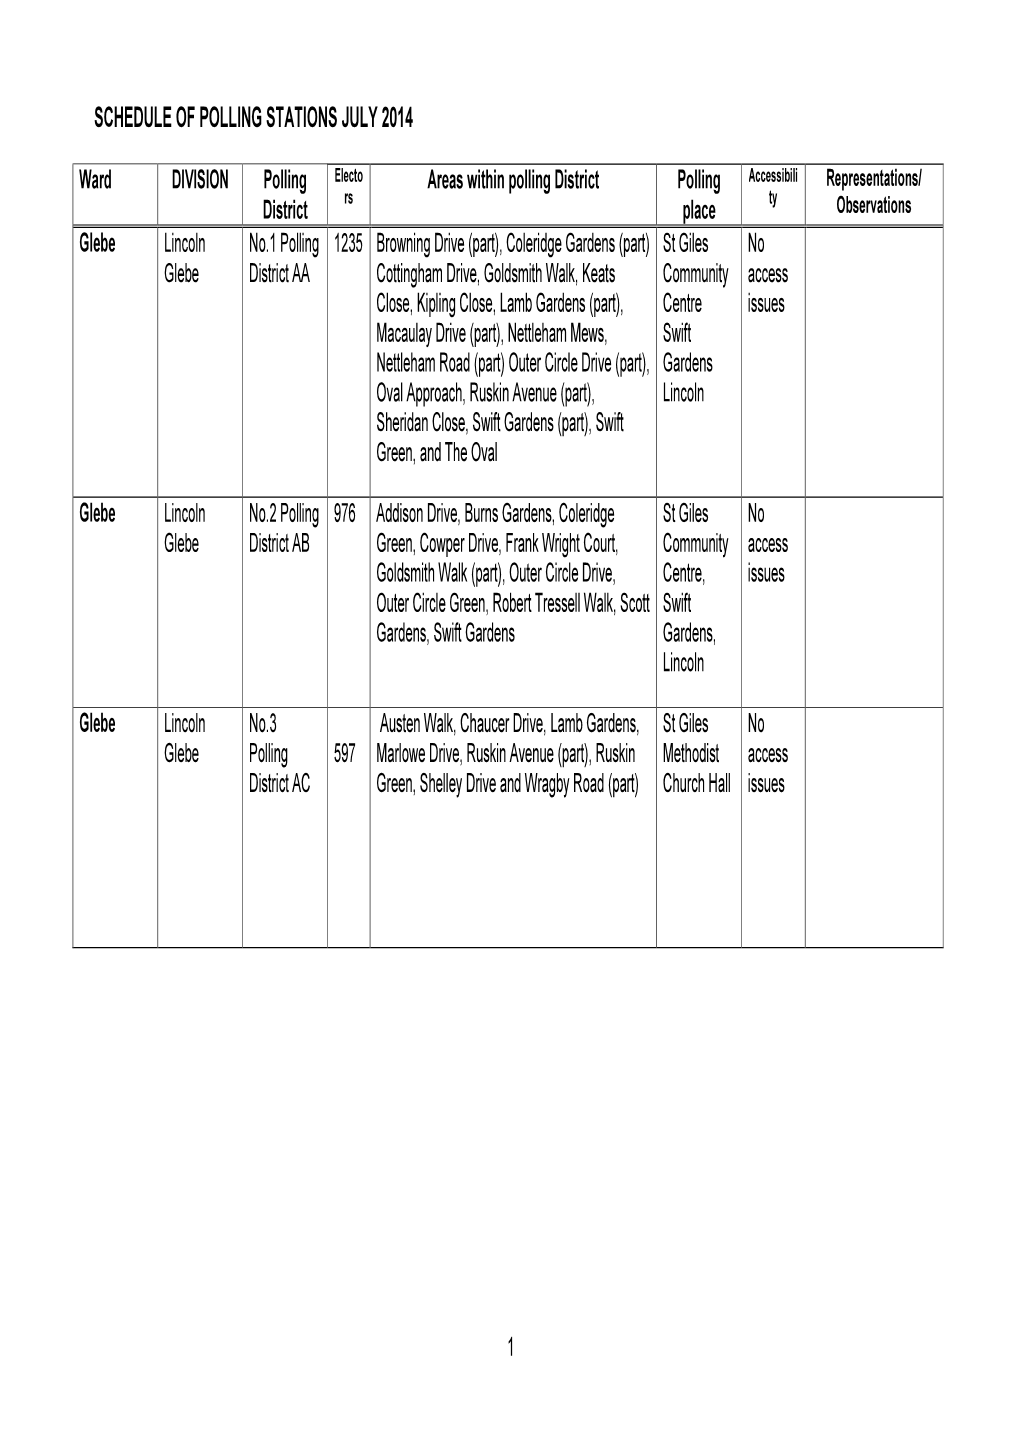 Schedule of Polling Stations July 2014